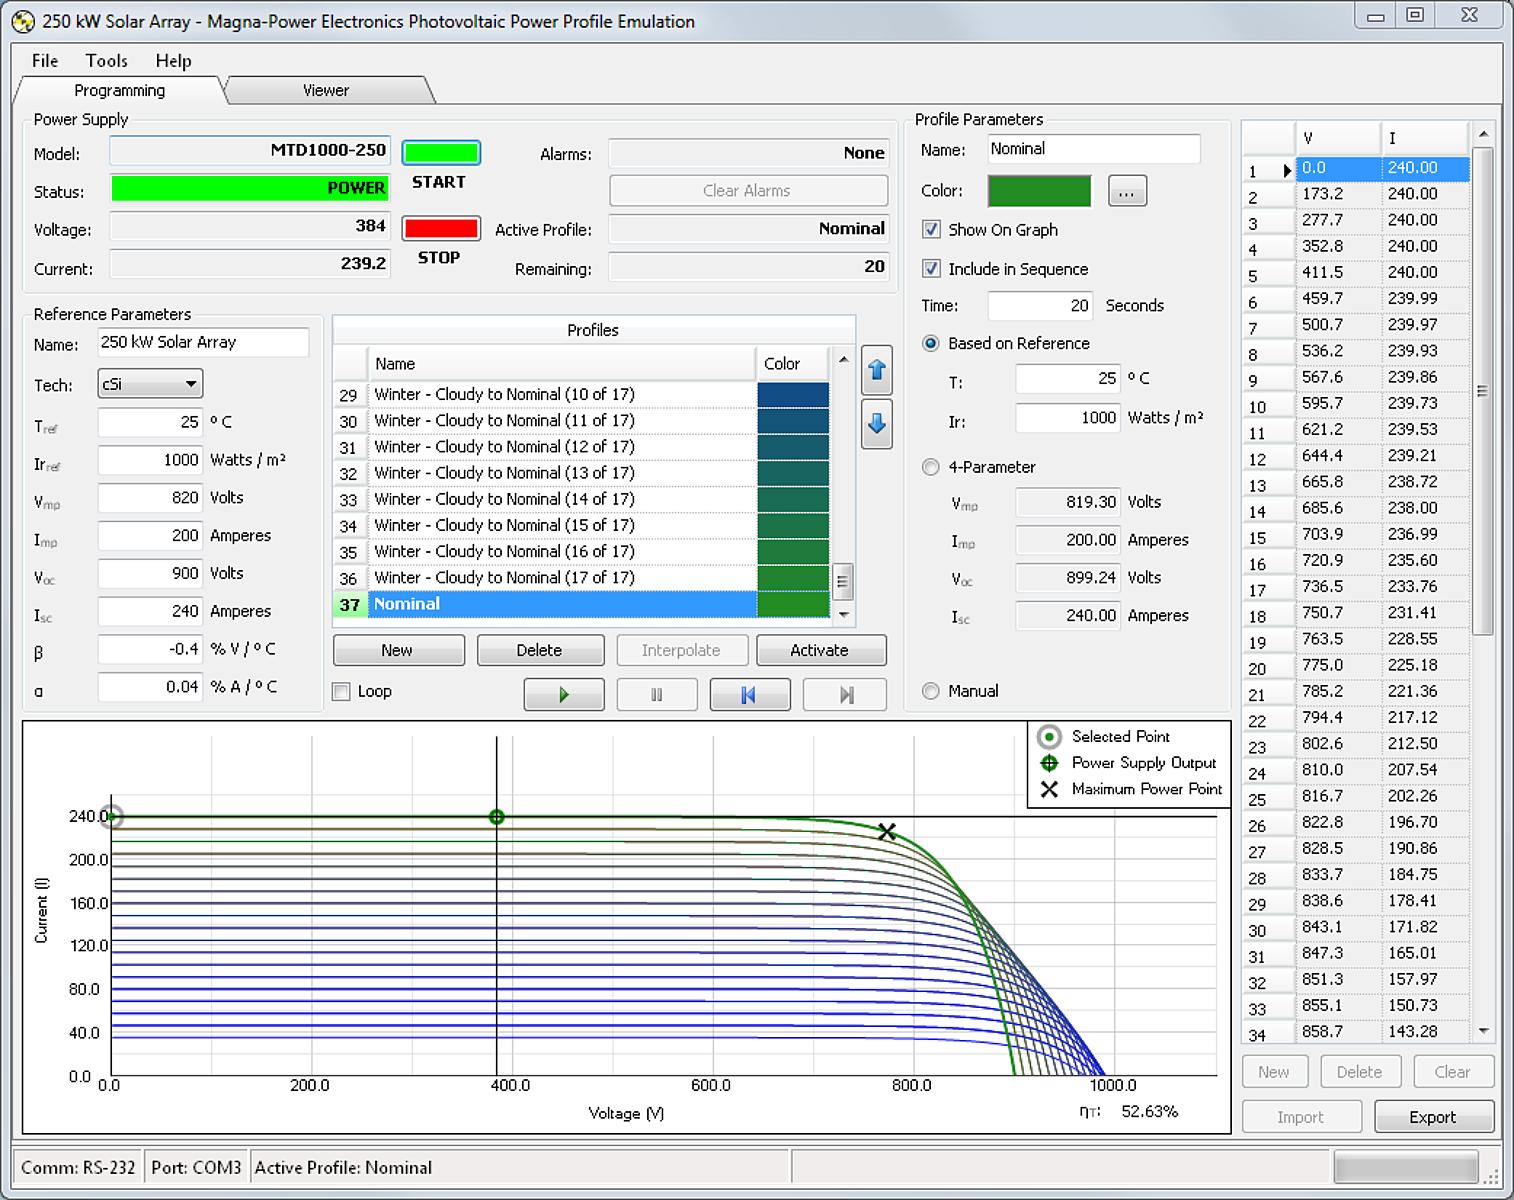 Figure 1. Main Screen of Magna-Power Electronics Photovoltaic Power Profile Emulation Software